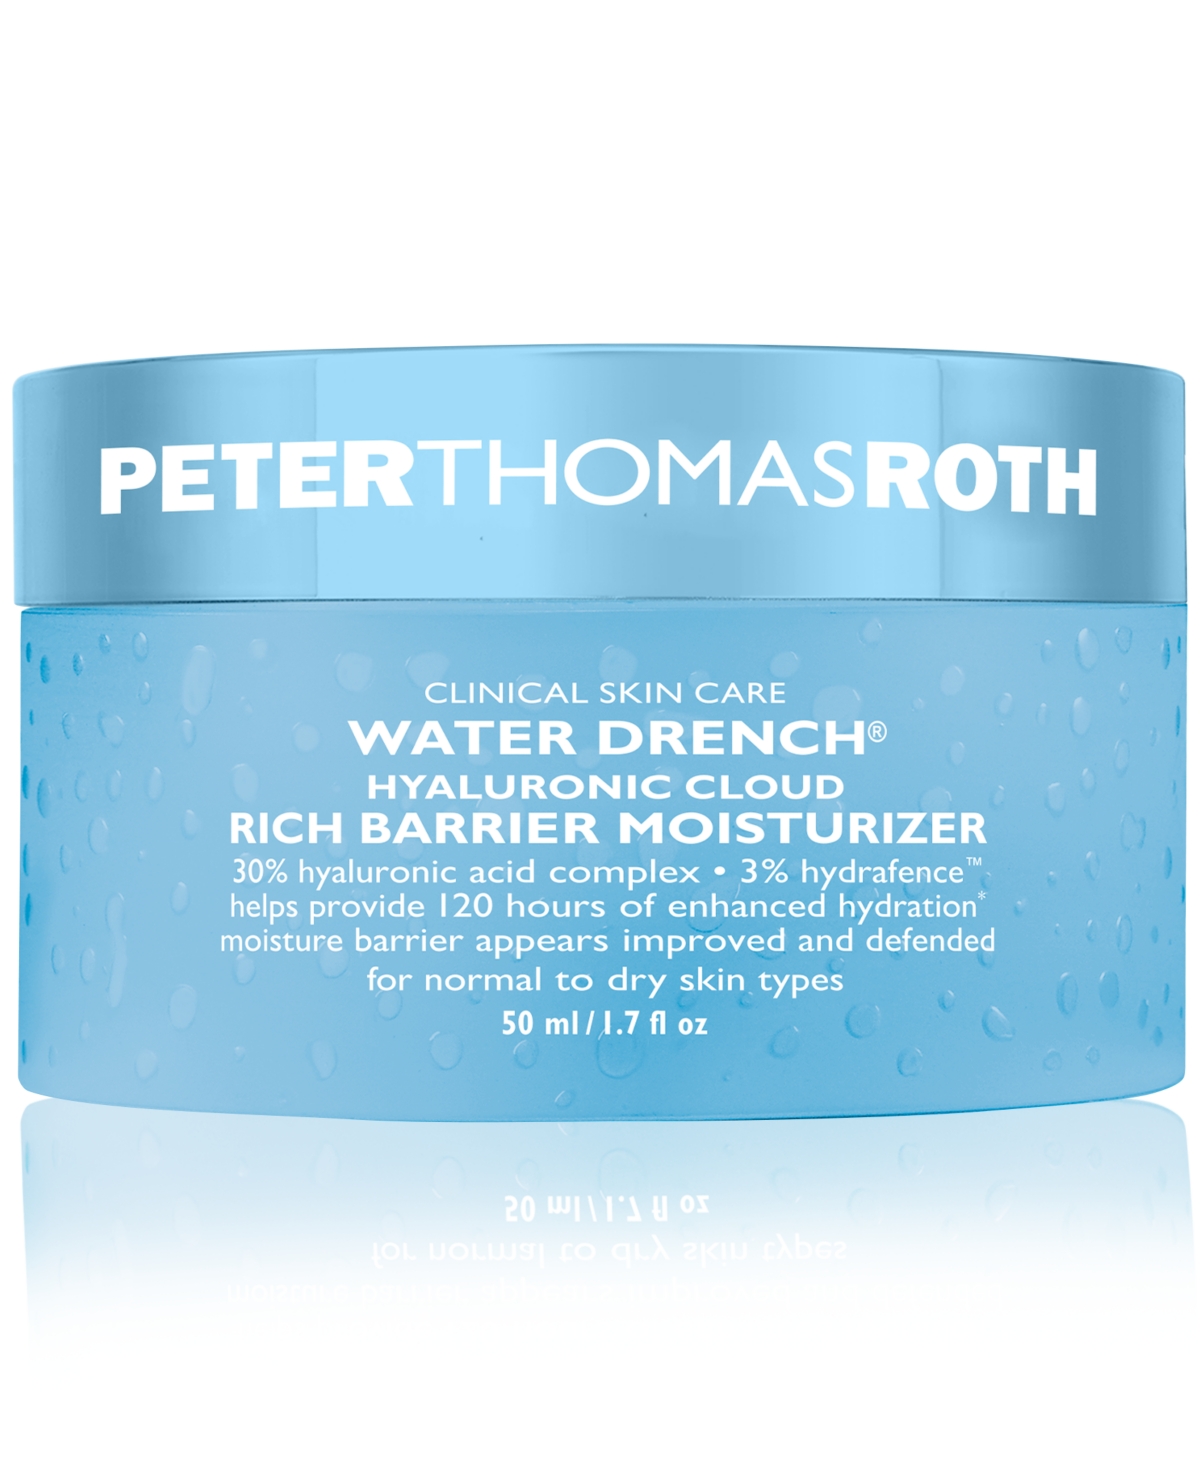 Shop Peter Thomas Roth Water Drench Hyaluronic Cloud Rich Barrier Moisturizer, 1.7oz